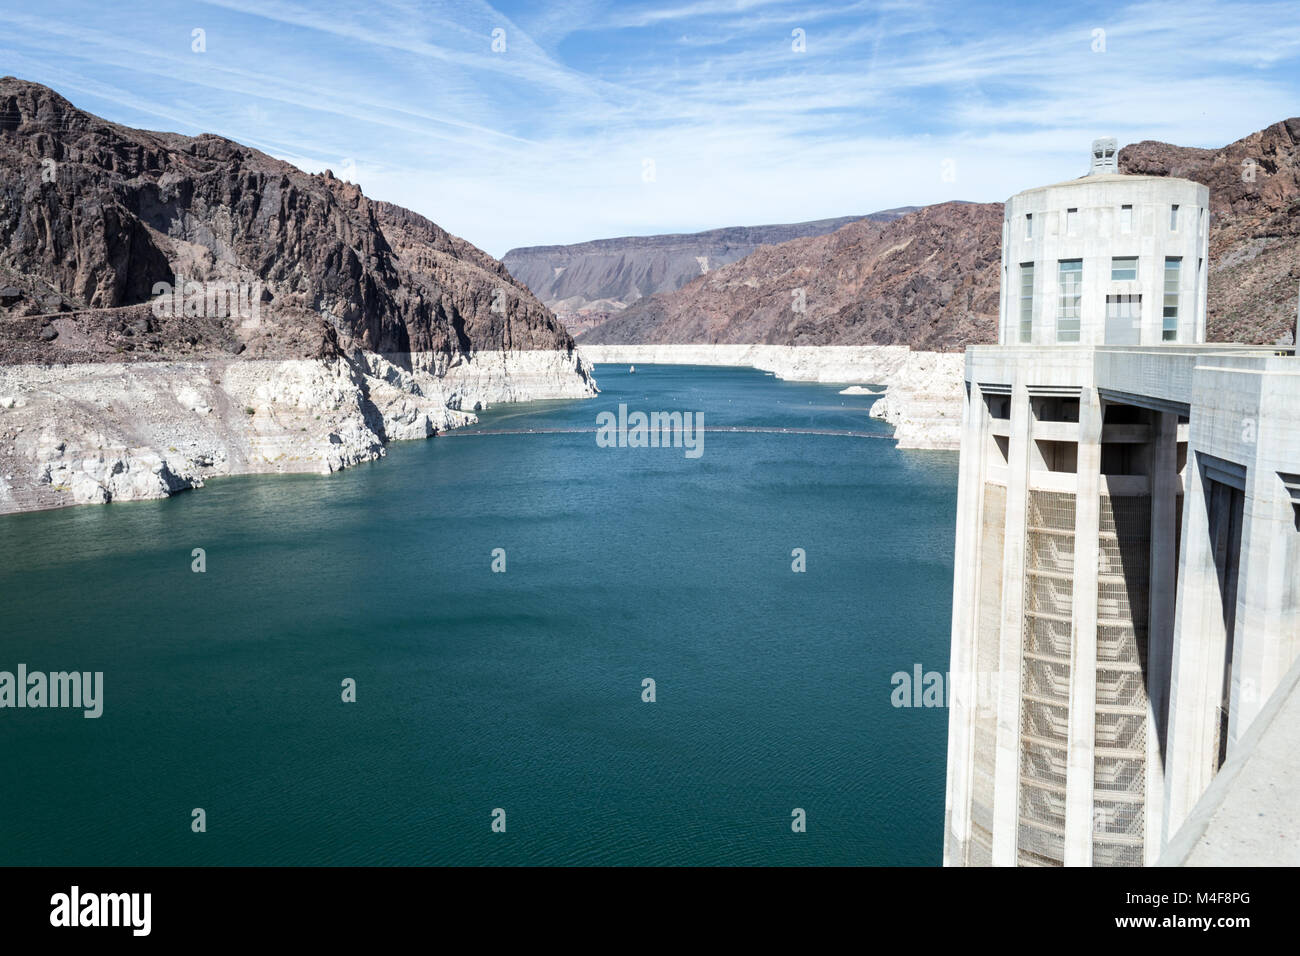 Lake Mead from the dam Stock Photo